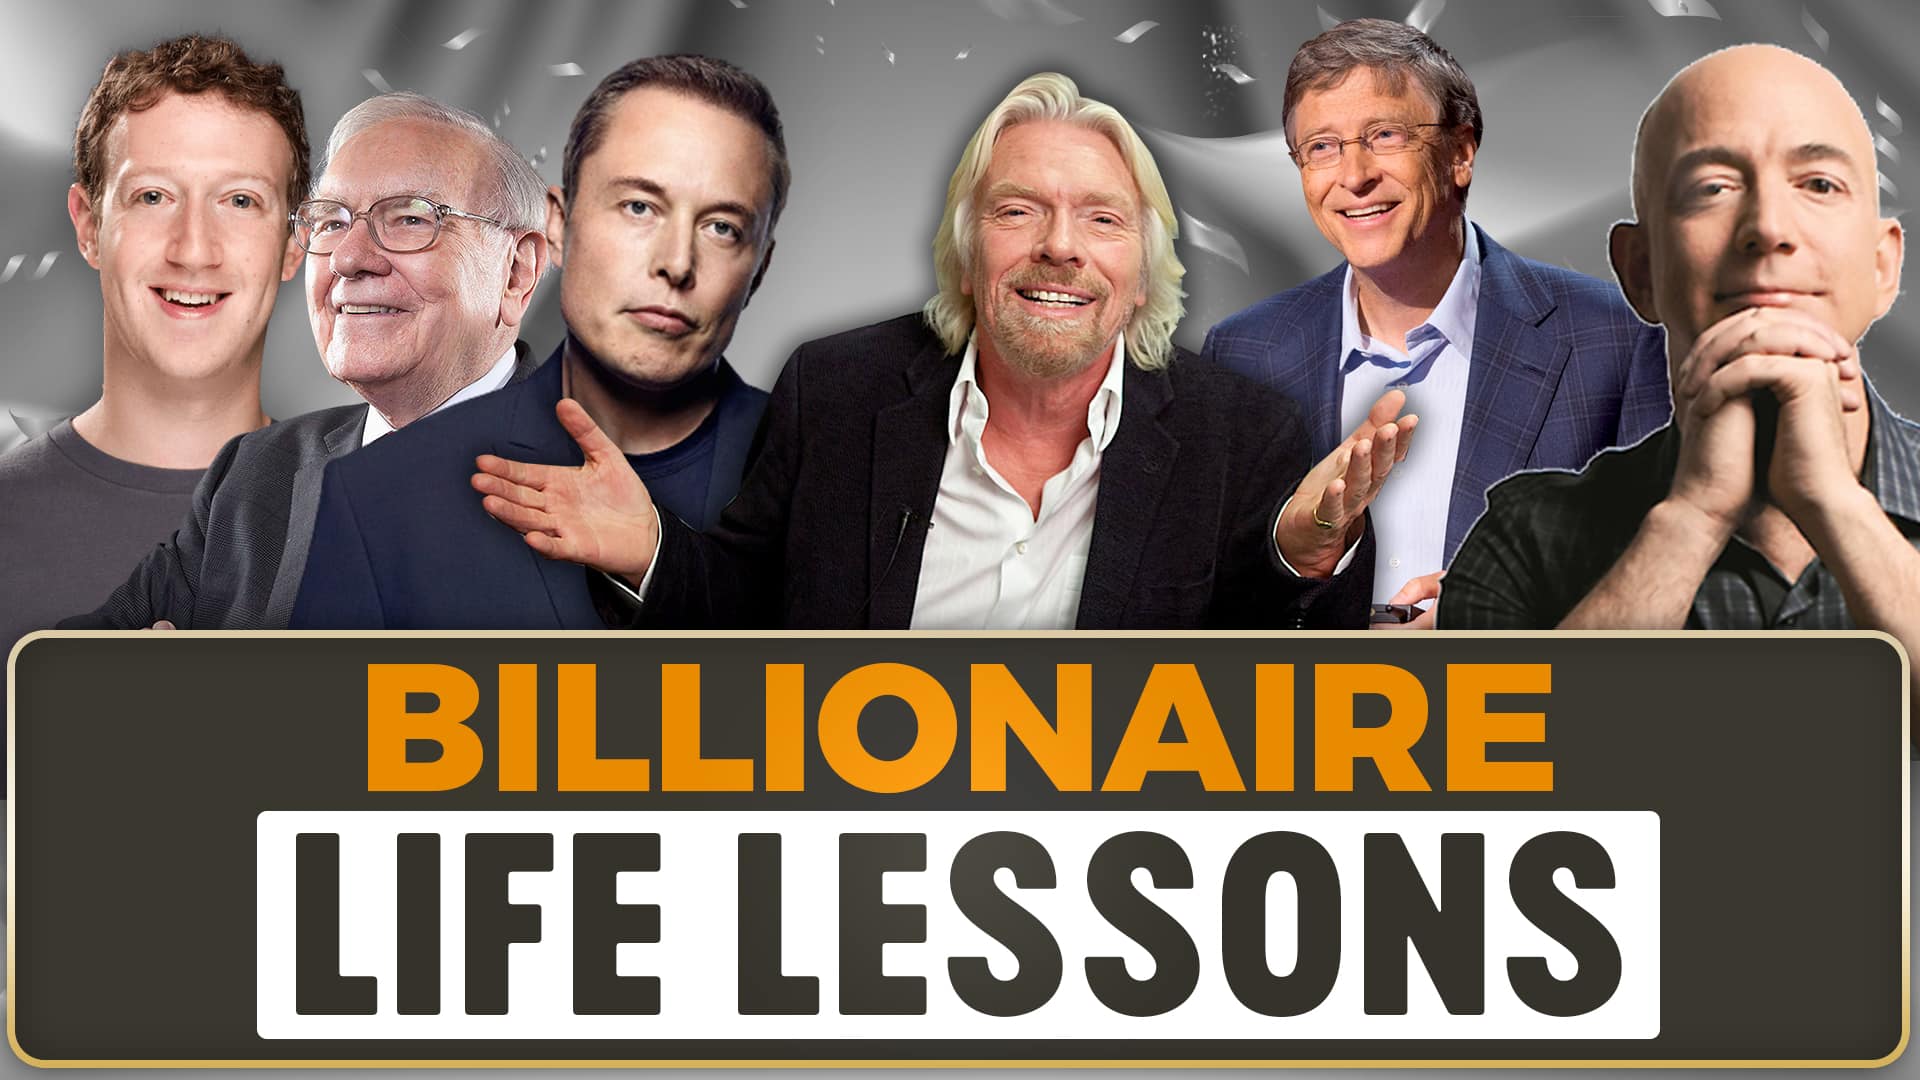 A Dying Billionaires Reflection on Life, Happiness, and Purpose...